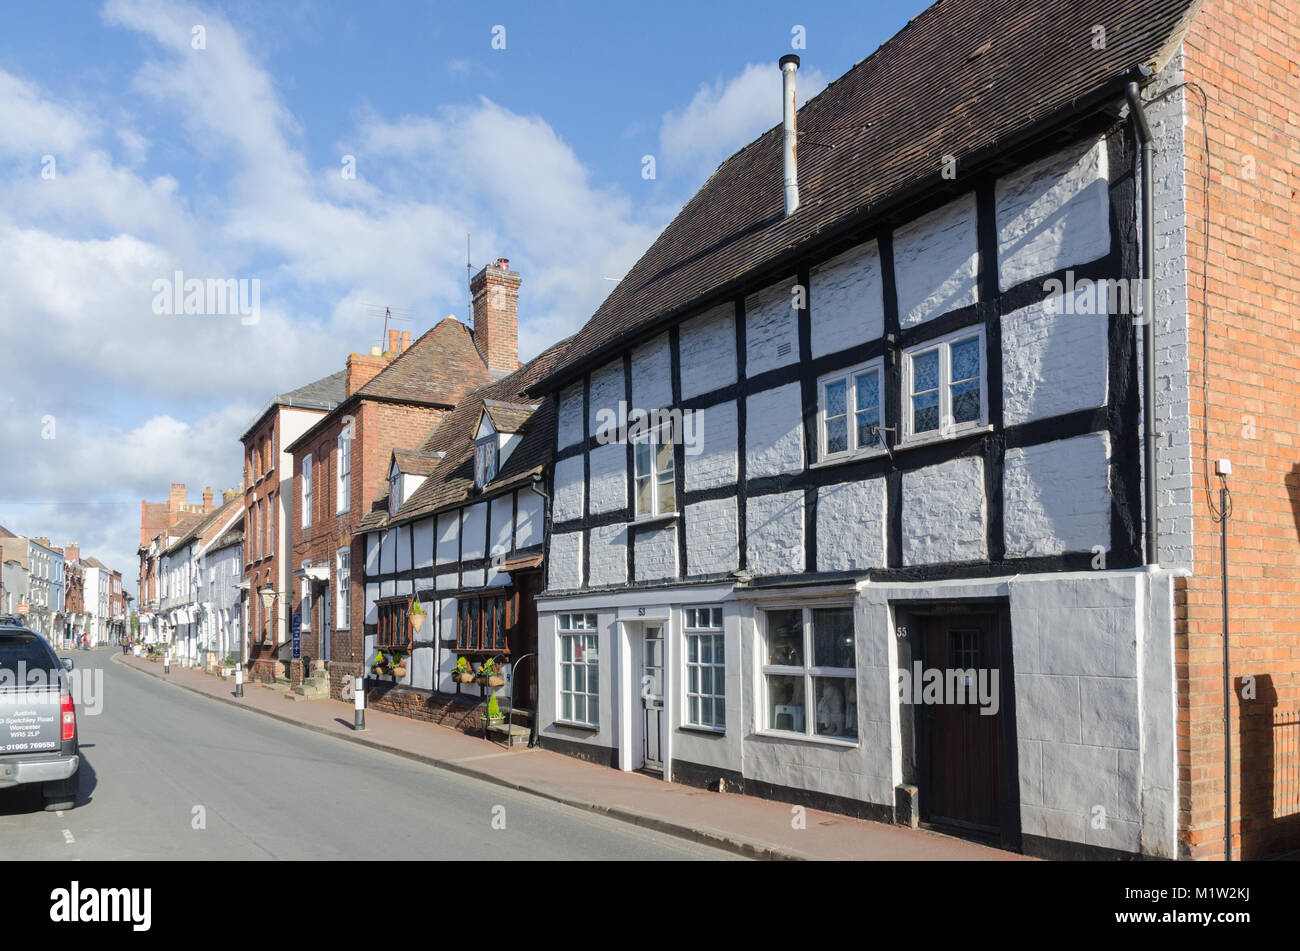 View along Old Street in the small Worcestershire town of Upton upon Severn Stock Photo